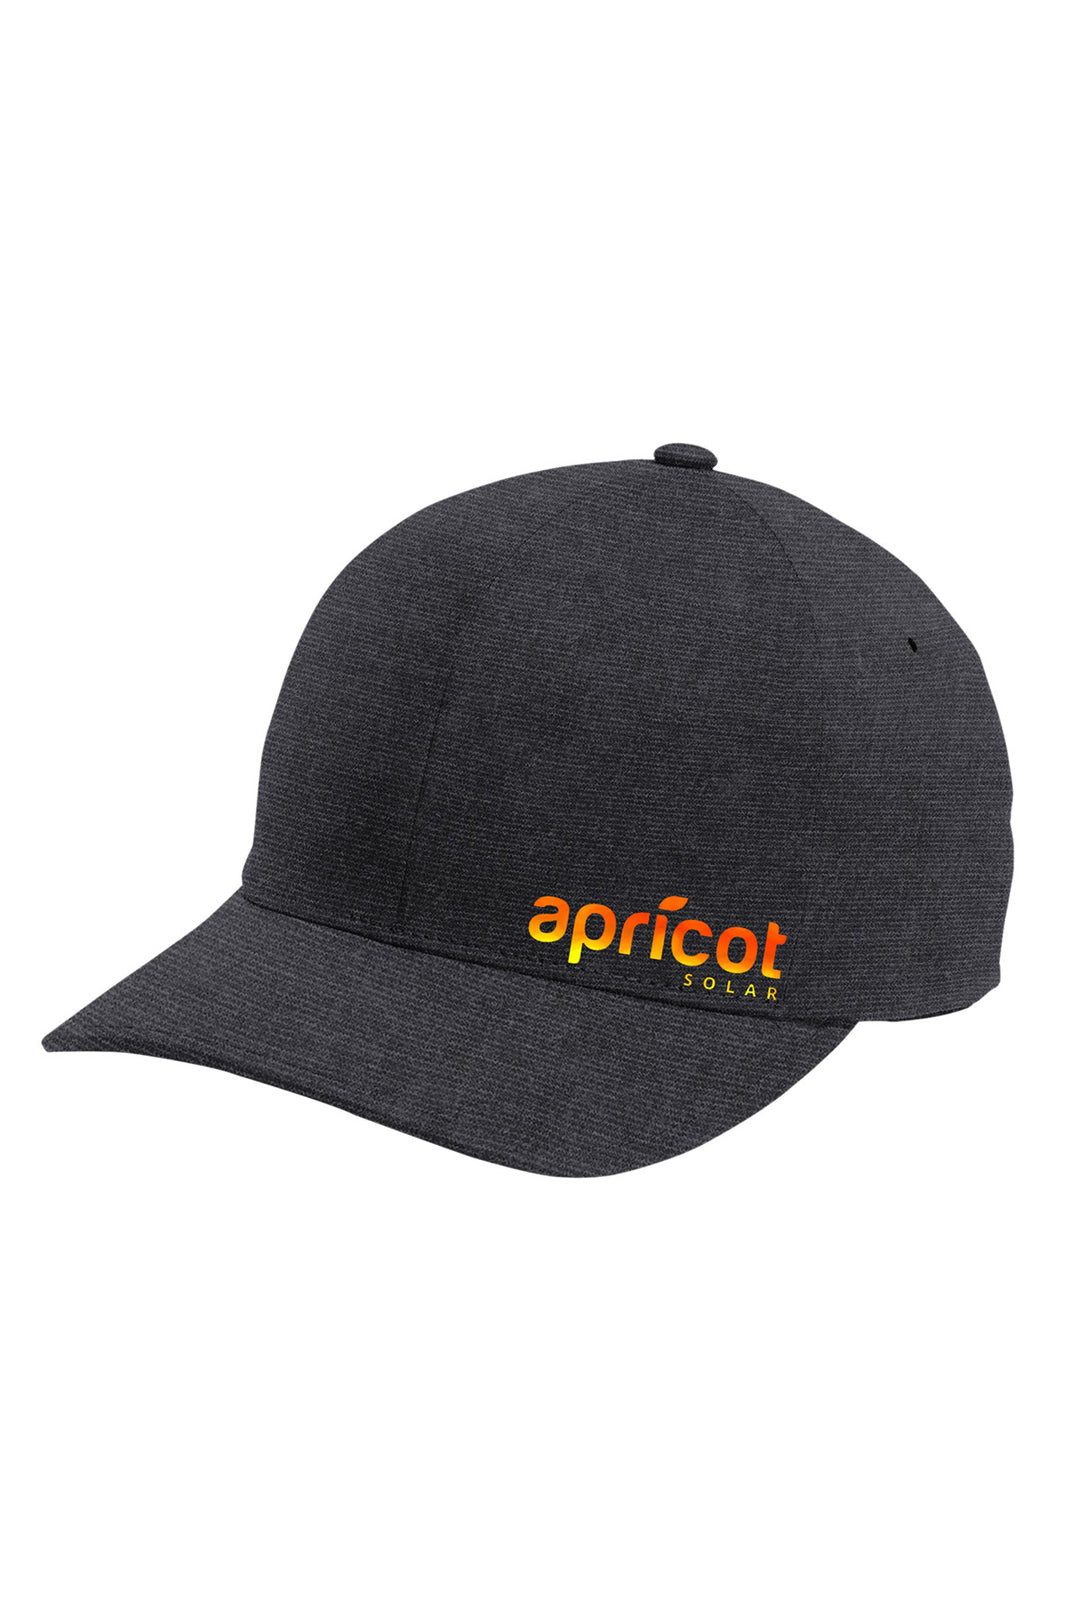 Apricot Delta Fitted Hat